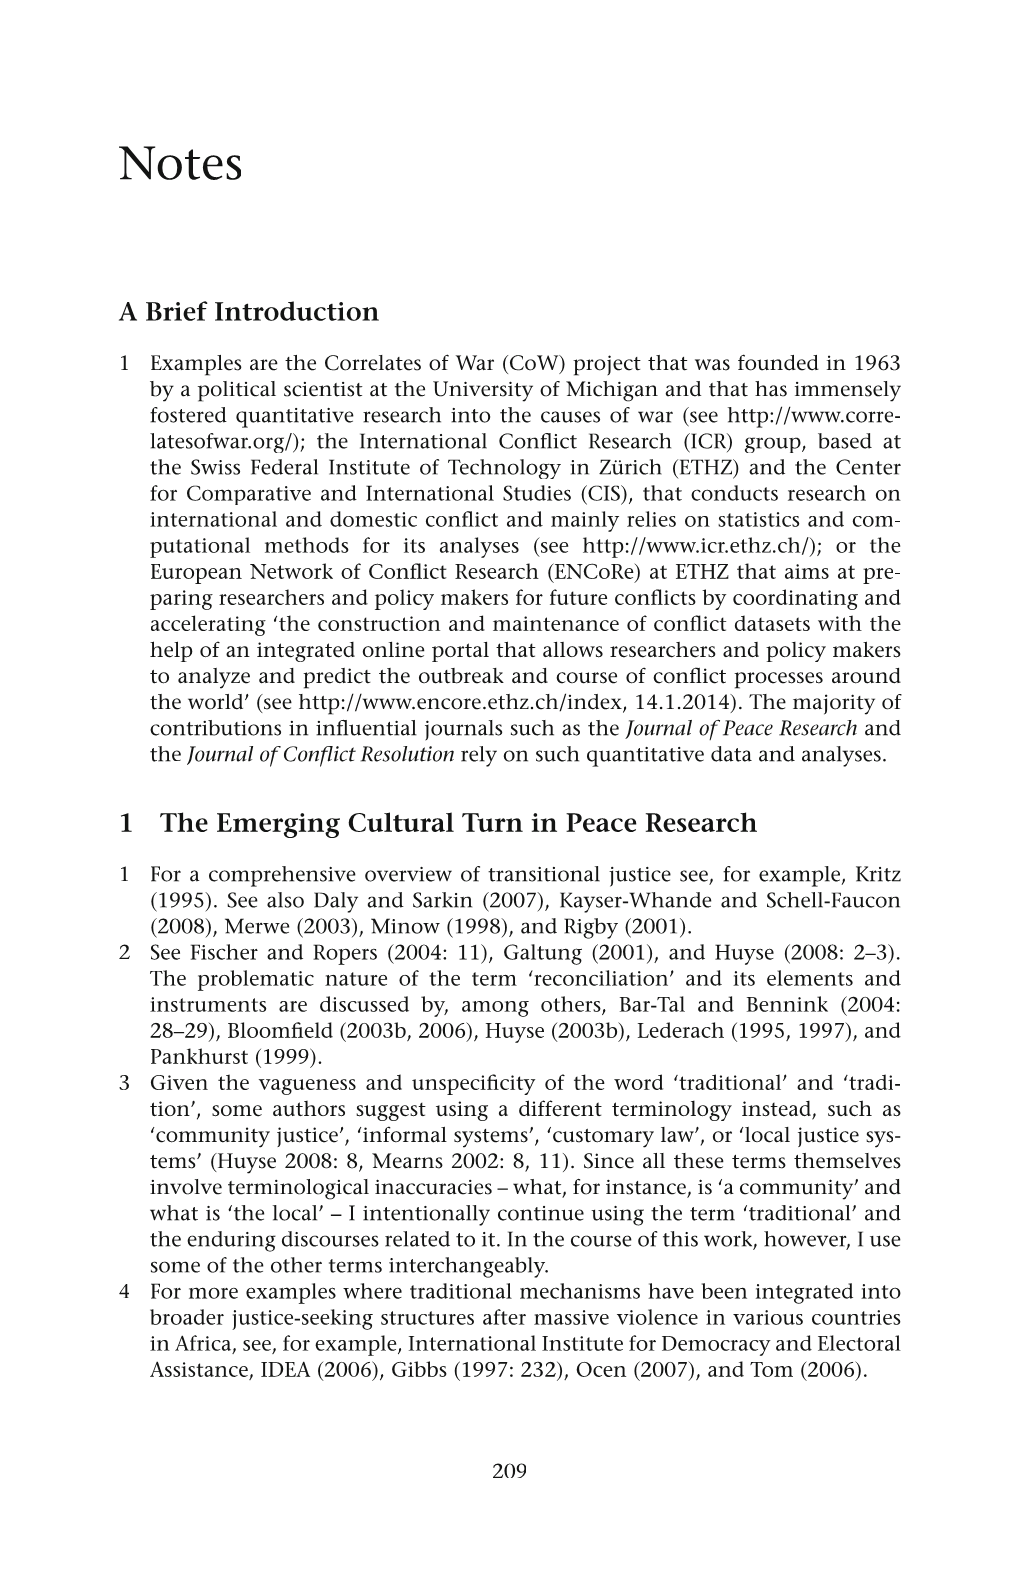 A Brief Introduction 1 the Emerging Cultural Turn in Peace Research